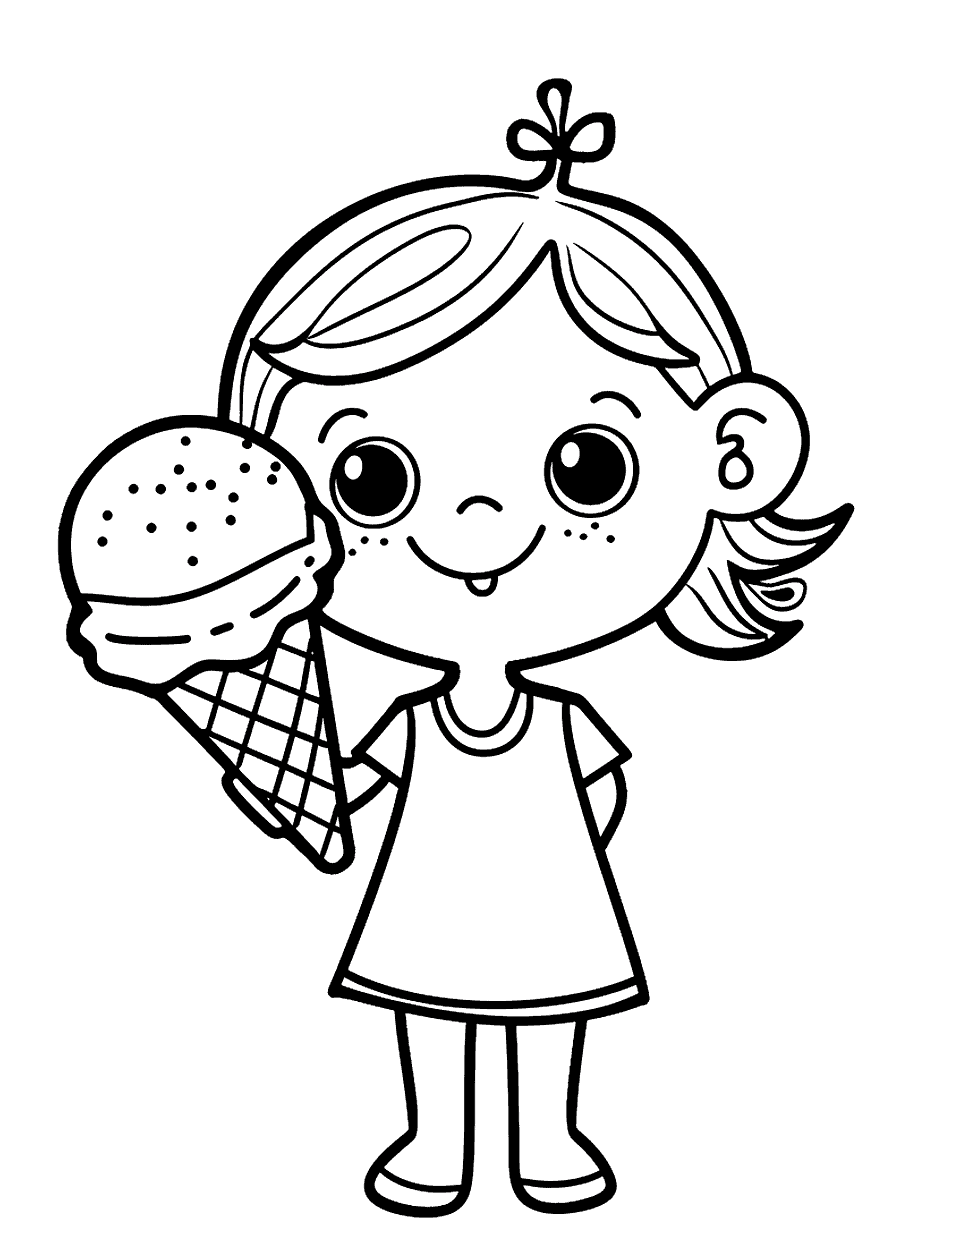 Girl with an Ice Cream Toddler Coloring Page - A girl holding an ice cream cone, with a wide smile on her face.